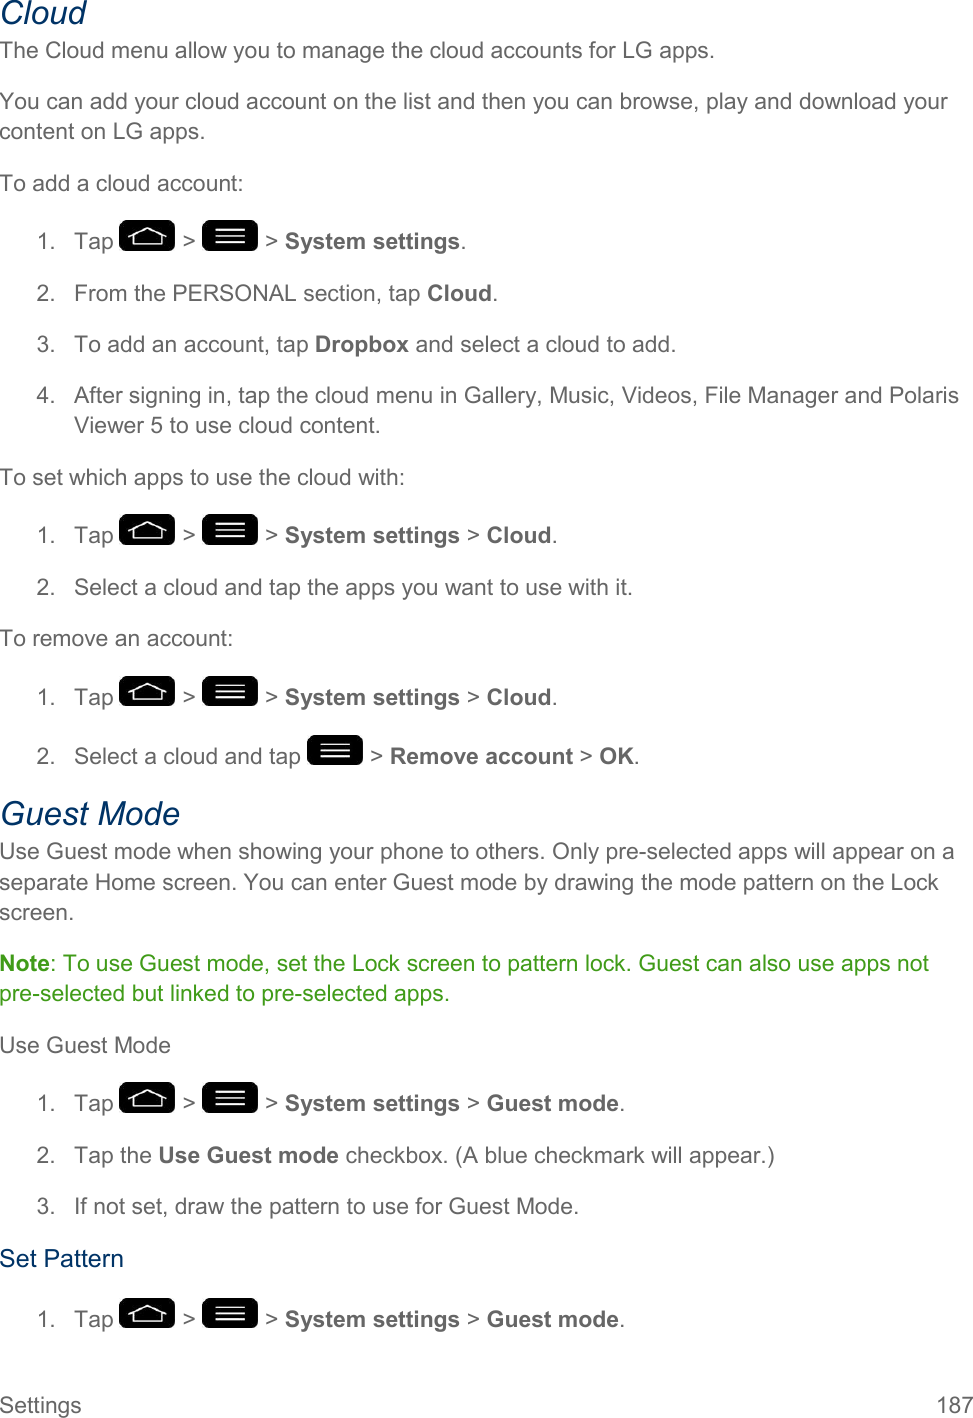 Settings  187 Cloud The Cloud menu allow you to manage the cloud accounts for LG apps. You can add your cloud account on the list and then you can browse, play and download your content on LG apps. To add a cloud account: 1.  Tap   &gt;   &gt; System settings. 2.  From the PERSONAL section, tap Cloud. 3.  To add an account, tap Dropbox and select a cloud to add. 4.  After signing in, tap the cloud menu in Gallery, Music, Videos, File Manager and Polaris Viewer 5 to use cloud content. To set which apps to use the cloud with: 1.  Tap   &gt;   &gt; System settings &gt; Cloud. 2.  Select a cloud and tap the apps you want to use with it. To remove an account: 1.  Tap   &gt;   &gt; System settings &gt; Cloud. 2.  Select a cloud and tap   &gt; Remove account &gt; OK. Guest Mode Use Guest mode when showing your phone to others. Only pre-selected apps will appear on a separate Home screen. You can enter Guest mode by drawing the mode pattern on the Lock screen. Note: To use Guest mode, set the Lock screen to pattern lock. Guest can also use apps not pre-selected but linked to pre-selected apps. Use Guest Mode 1.  Tap   &gt;   &gt; System settings &gt; Guest mode. 2.  Tap the Use Guest mode checkbox. (A blue checkmark will appear.) 3.  If not set, draw the pattern to use for Guest Mode. Set Pattern 1.  Tap   &gt;   &gt; System settings &gt; Guest mode. 